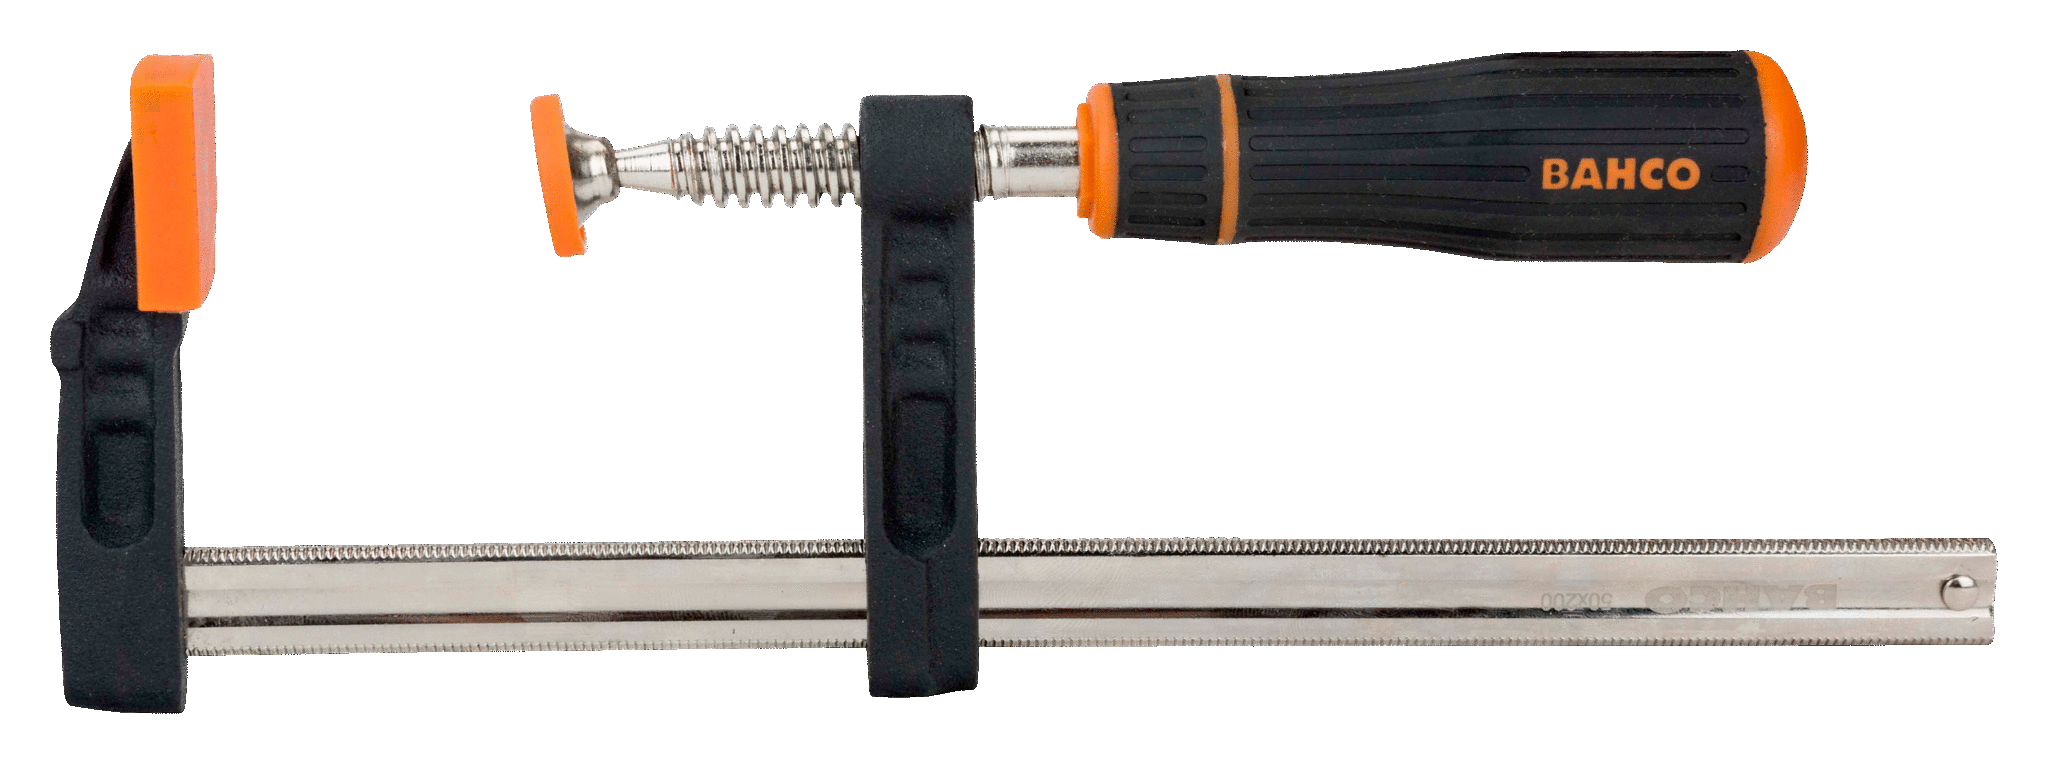 F-Clamps with Rubberised Handle - 420SH-120-800 by Bahco